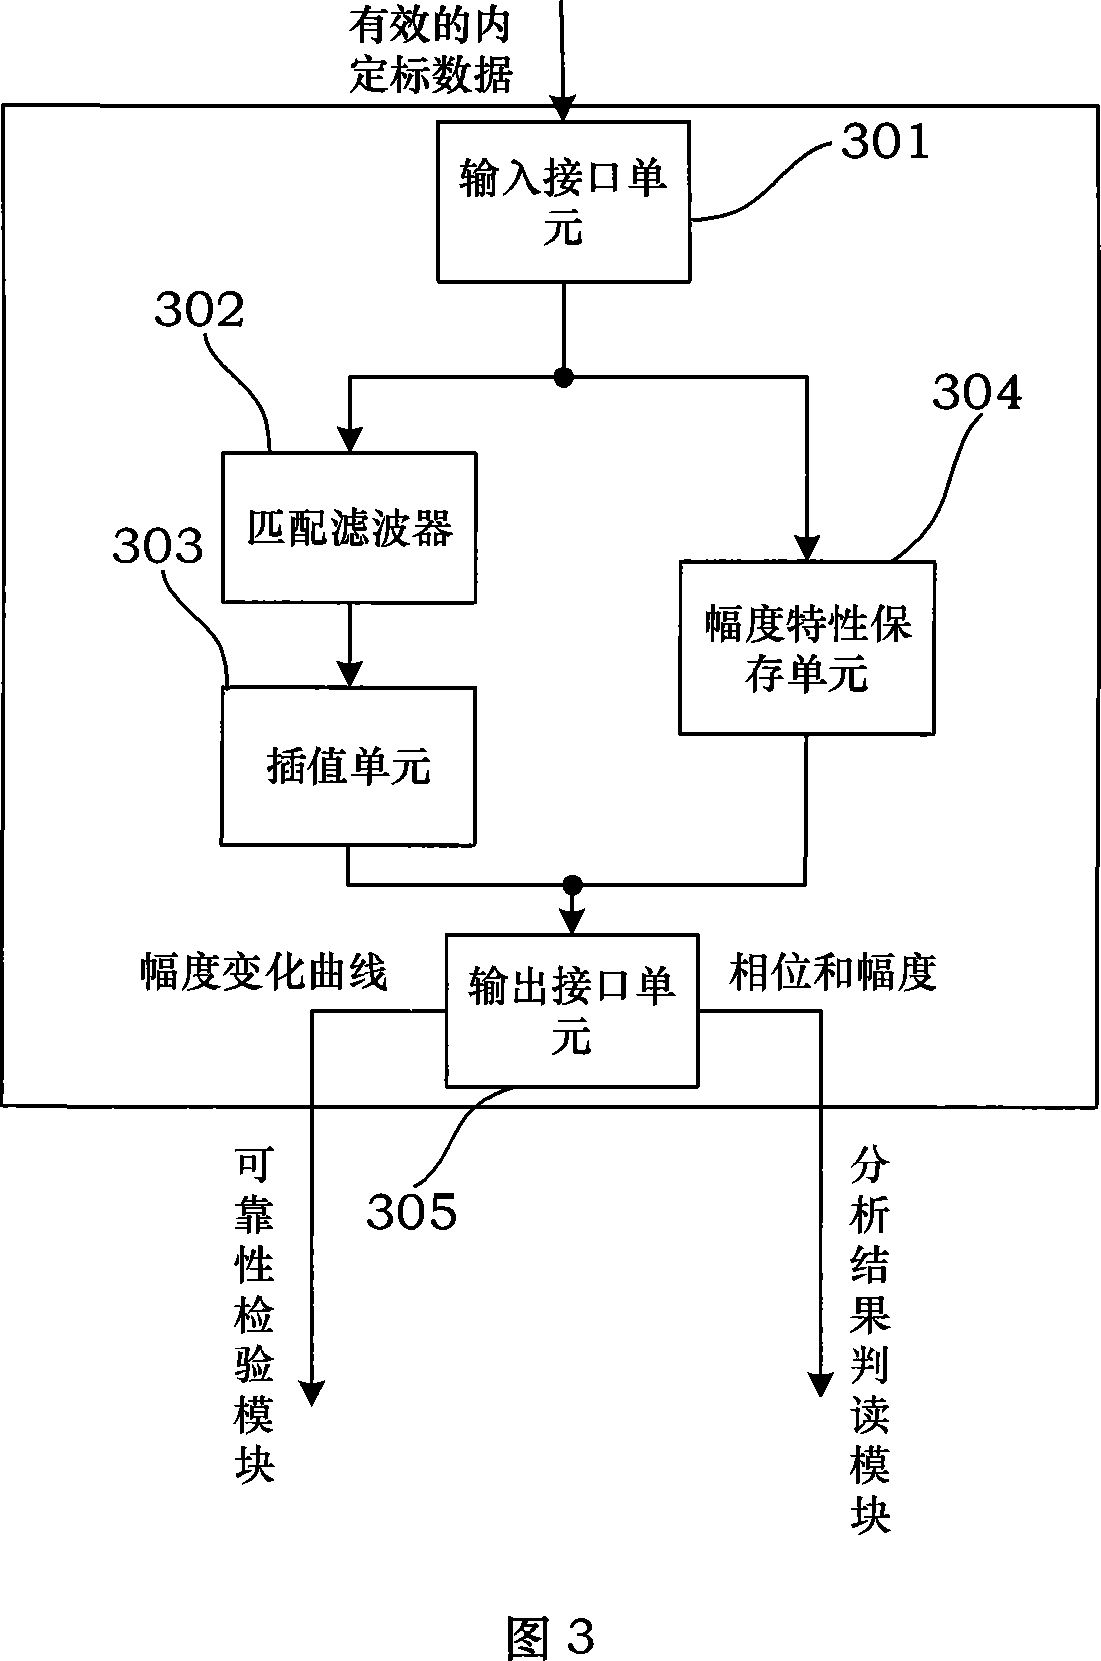 Satellite carried SAR inner marking signal processing platform system and realization method thereof